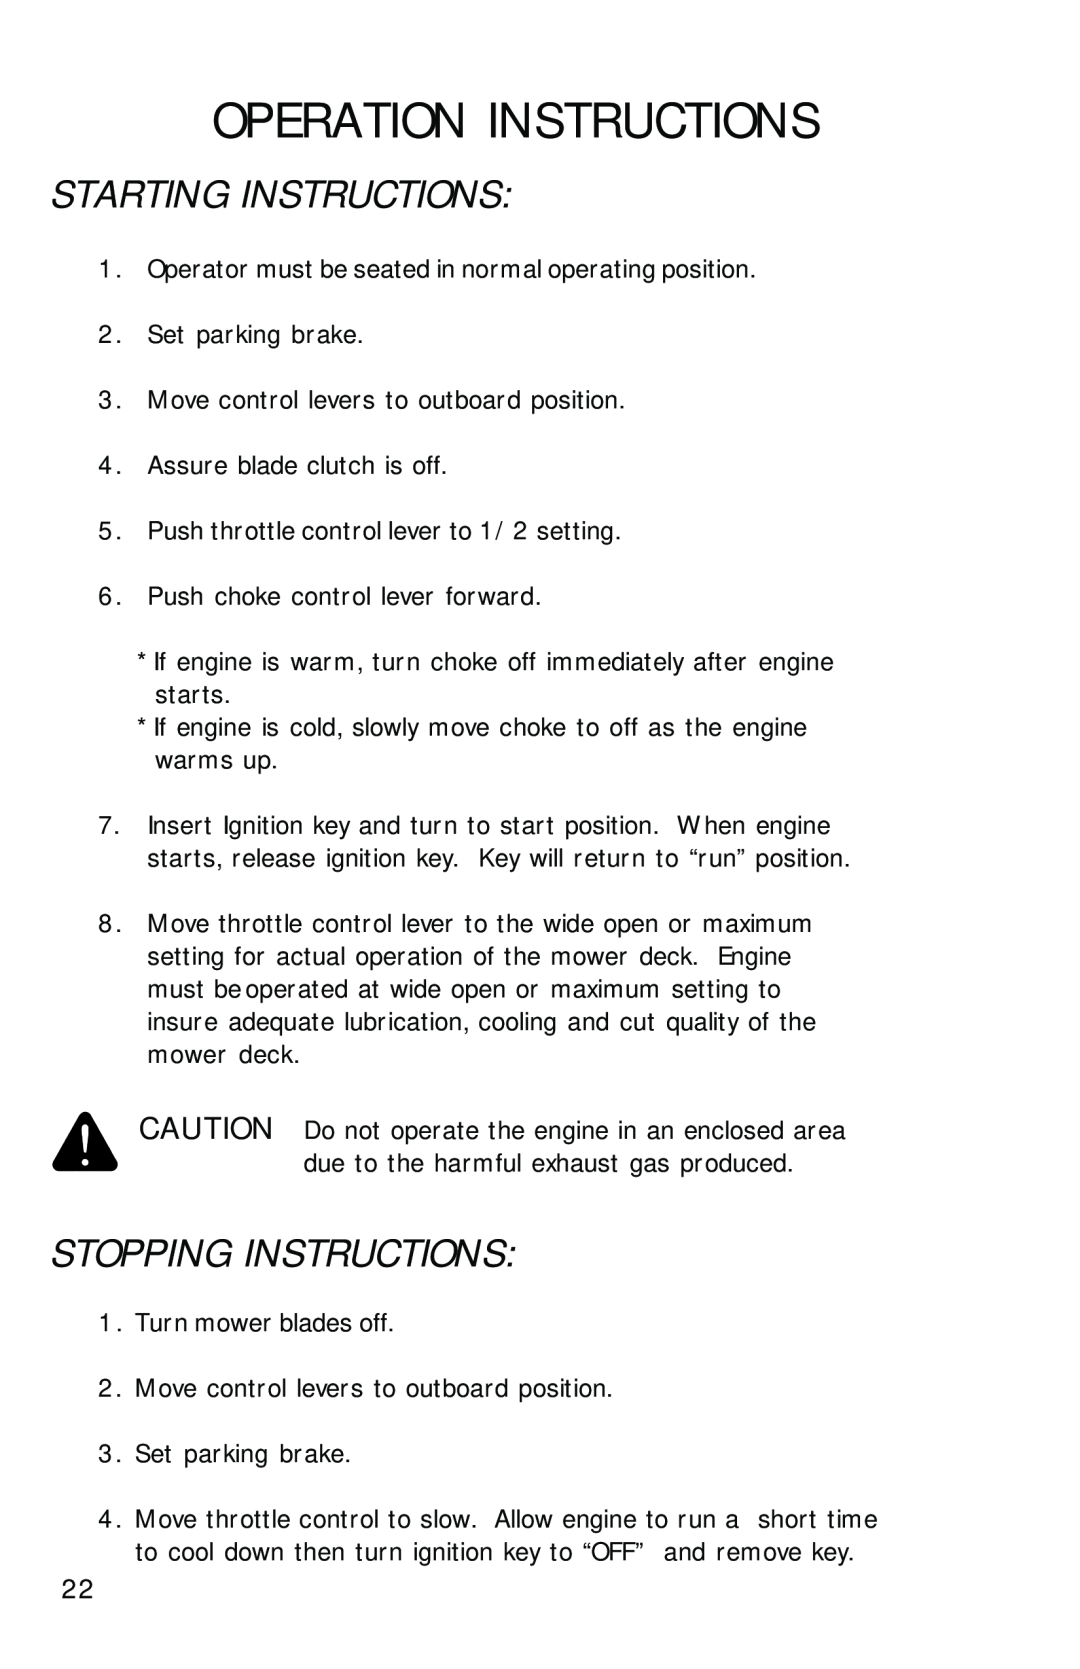 Dixon 2700 manual Starting Instructions, Stopping Instructions, Operation Instructions 